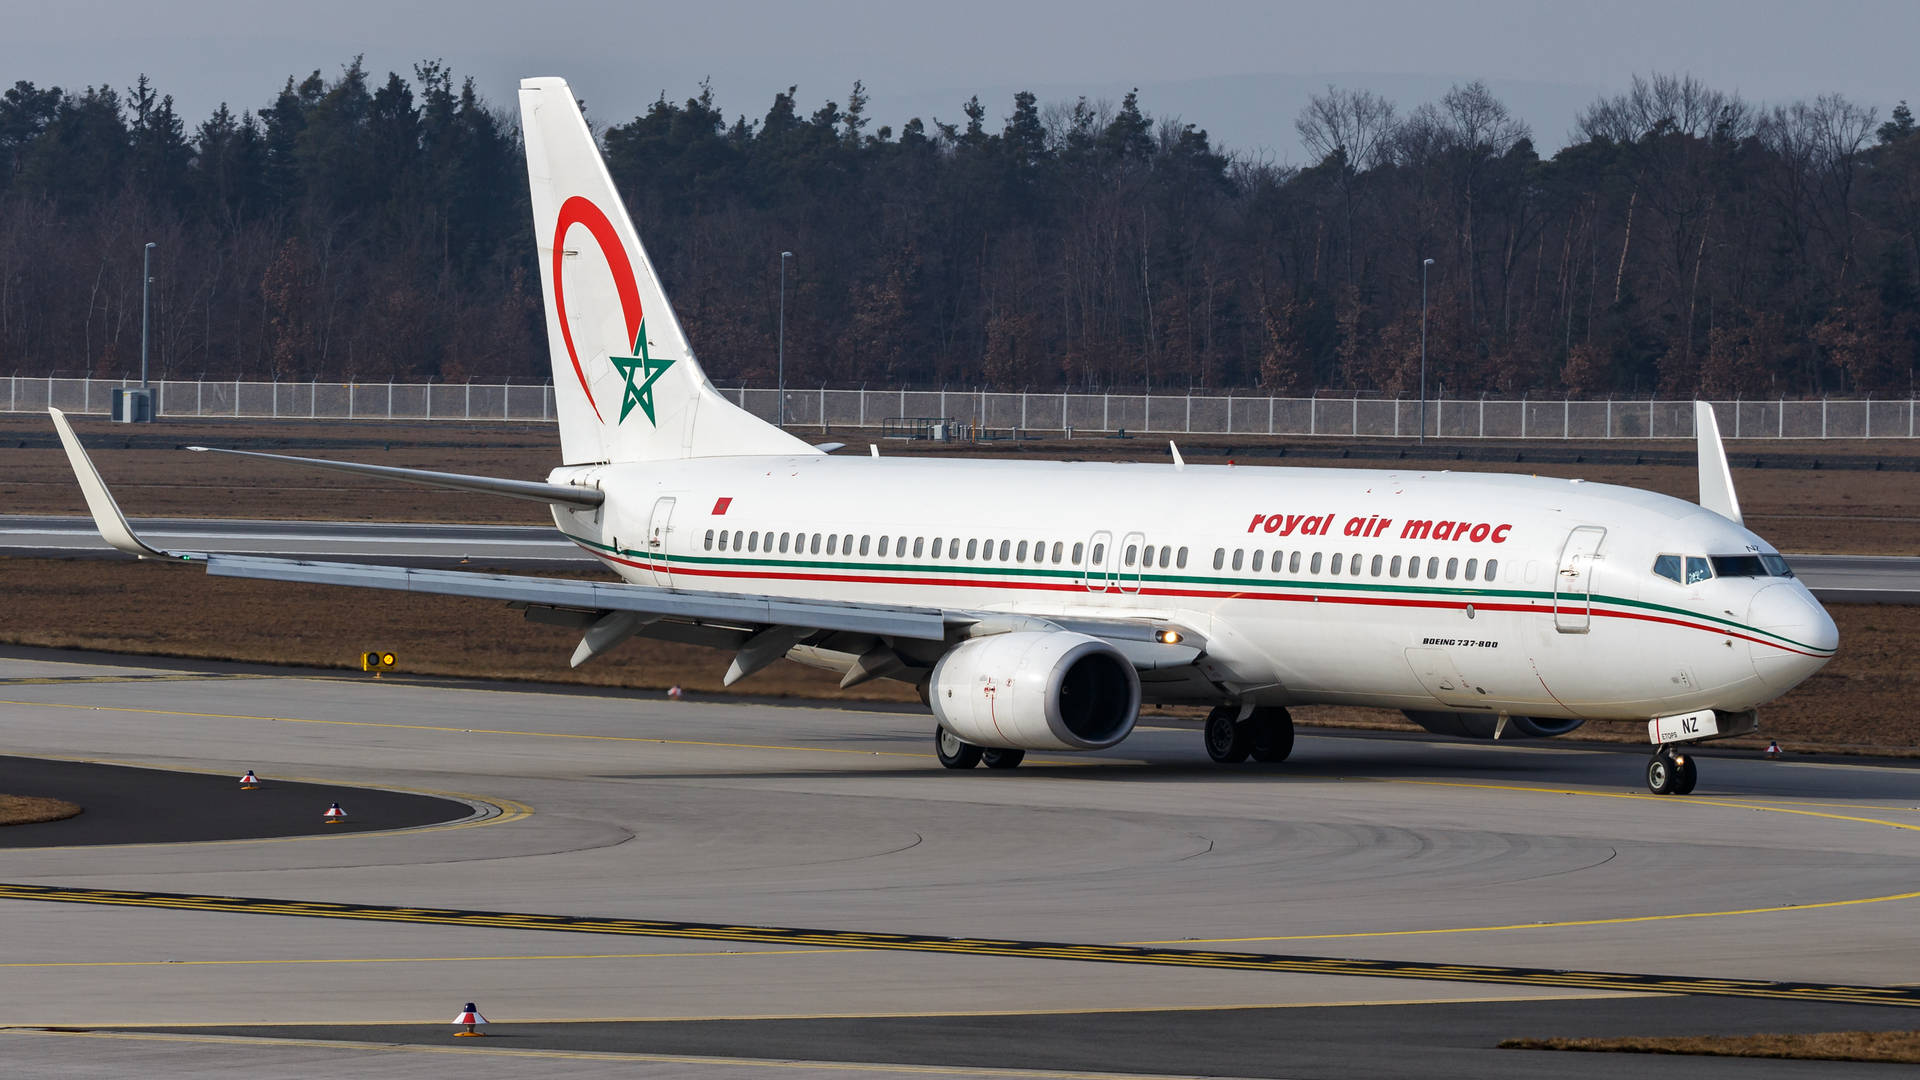 Royal Air Maroc With Tall Trees Wallpaper